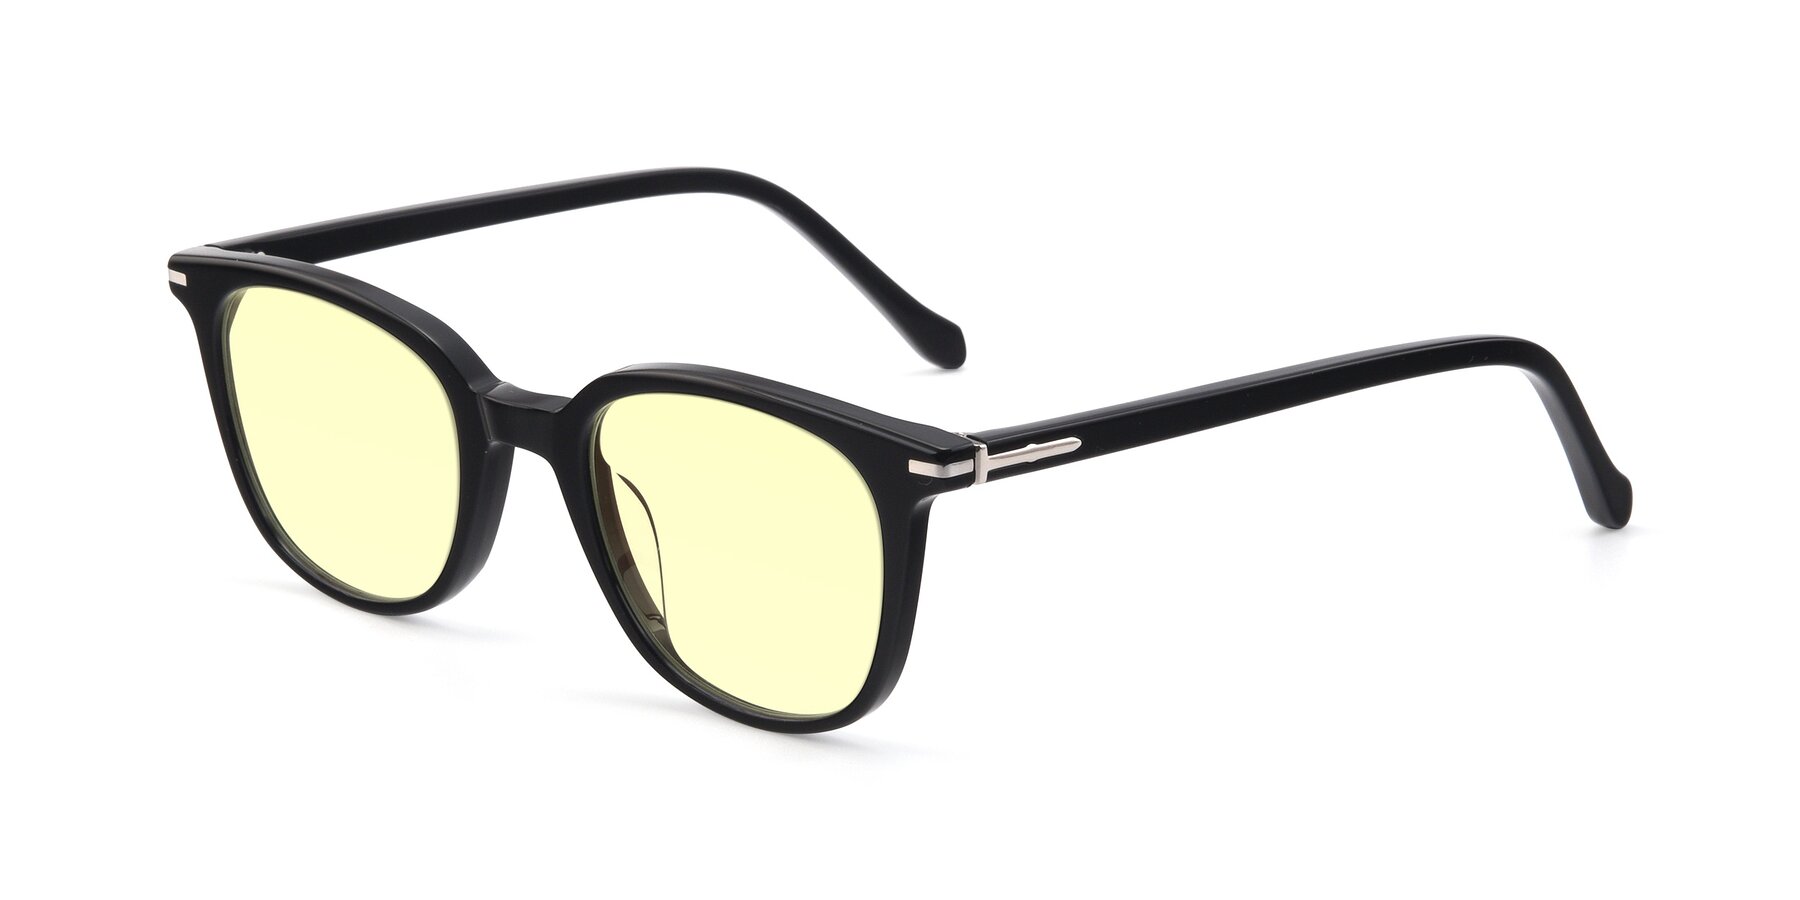 Angle of 17562 in Black with Light Yellow Tinted Lenses